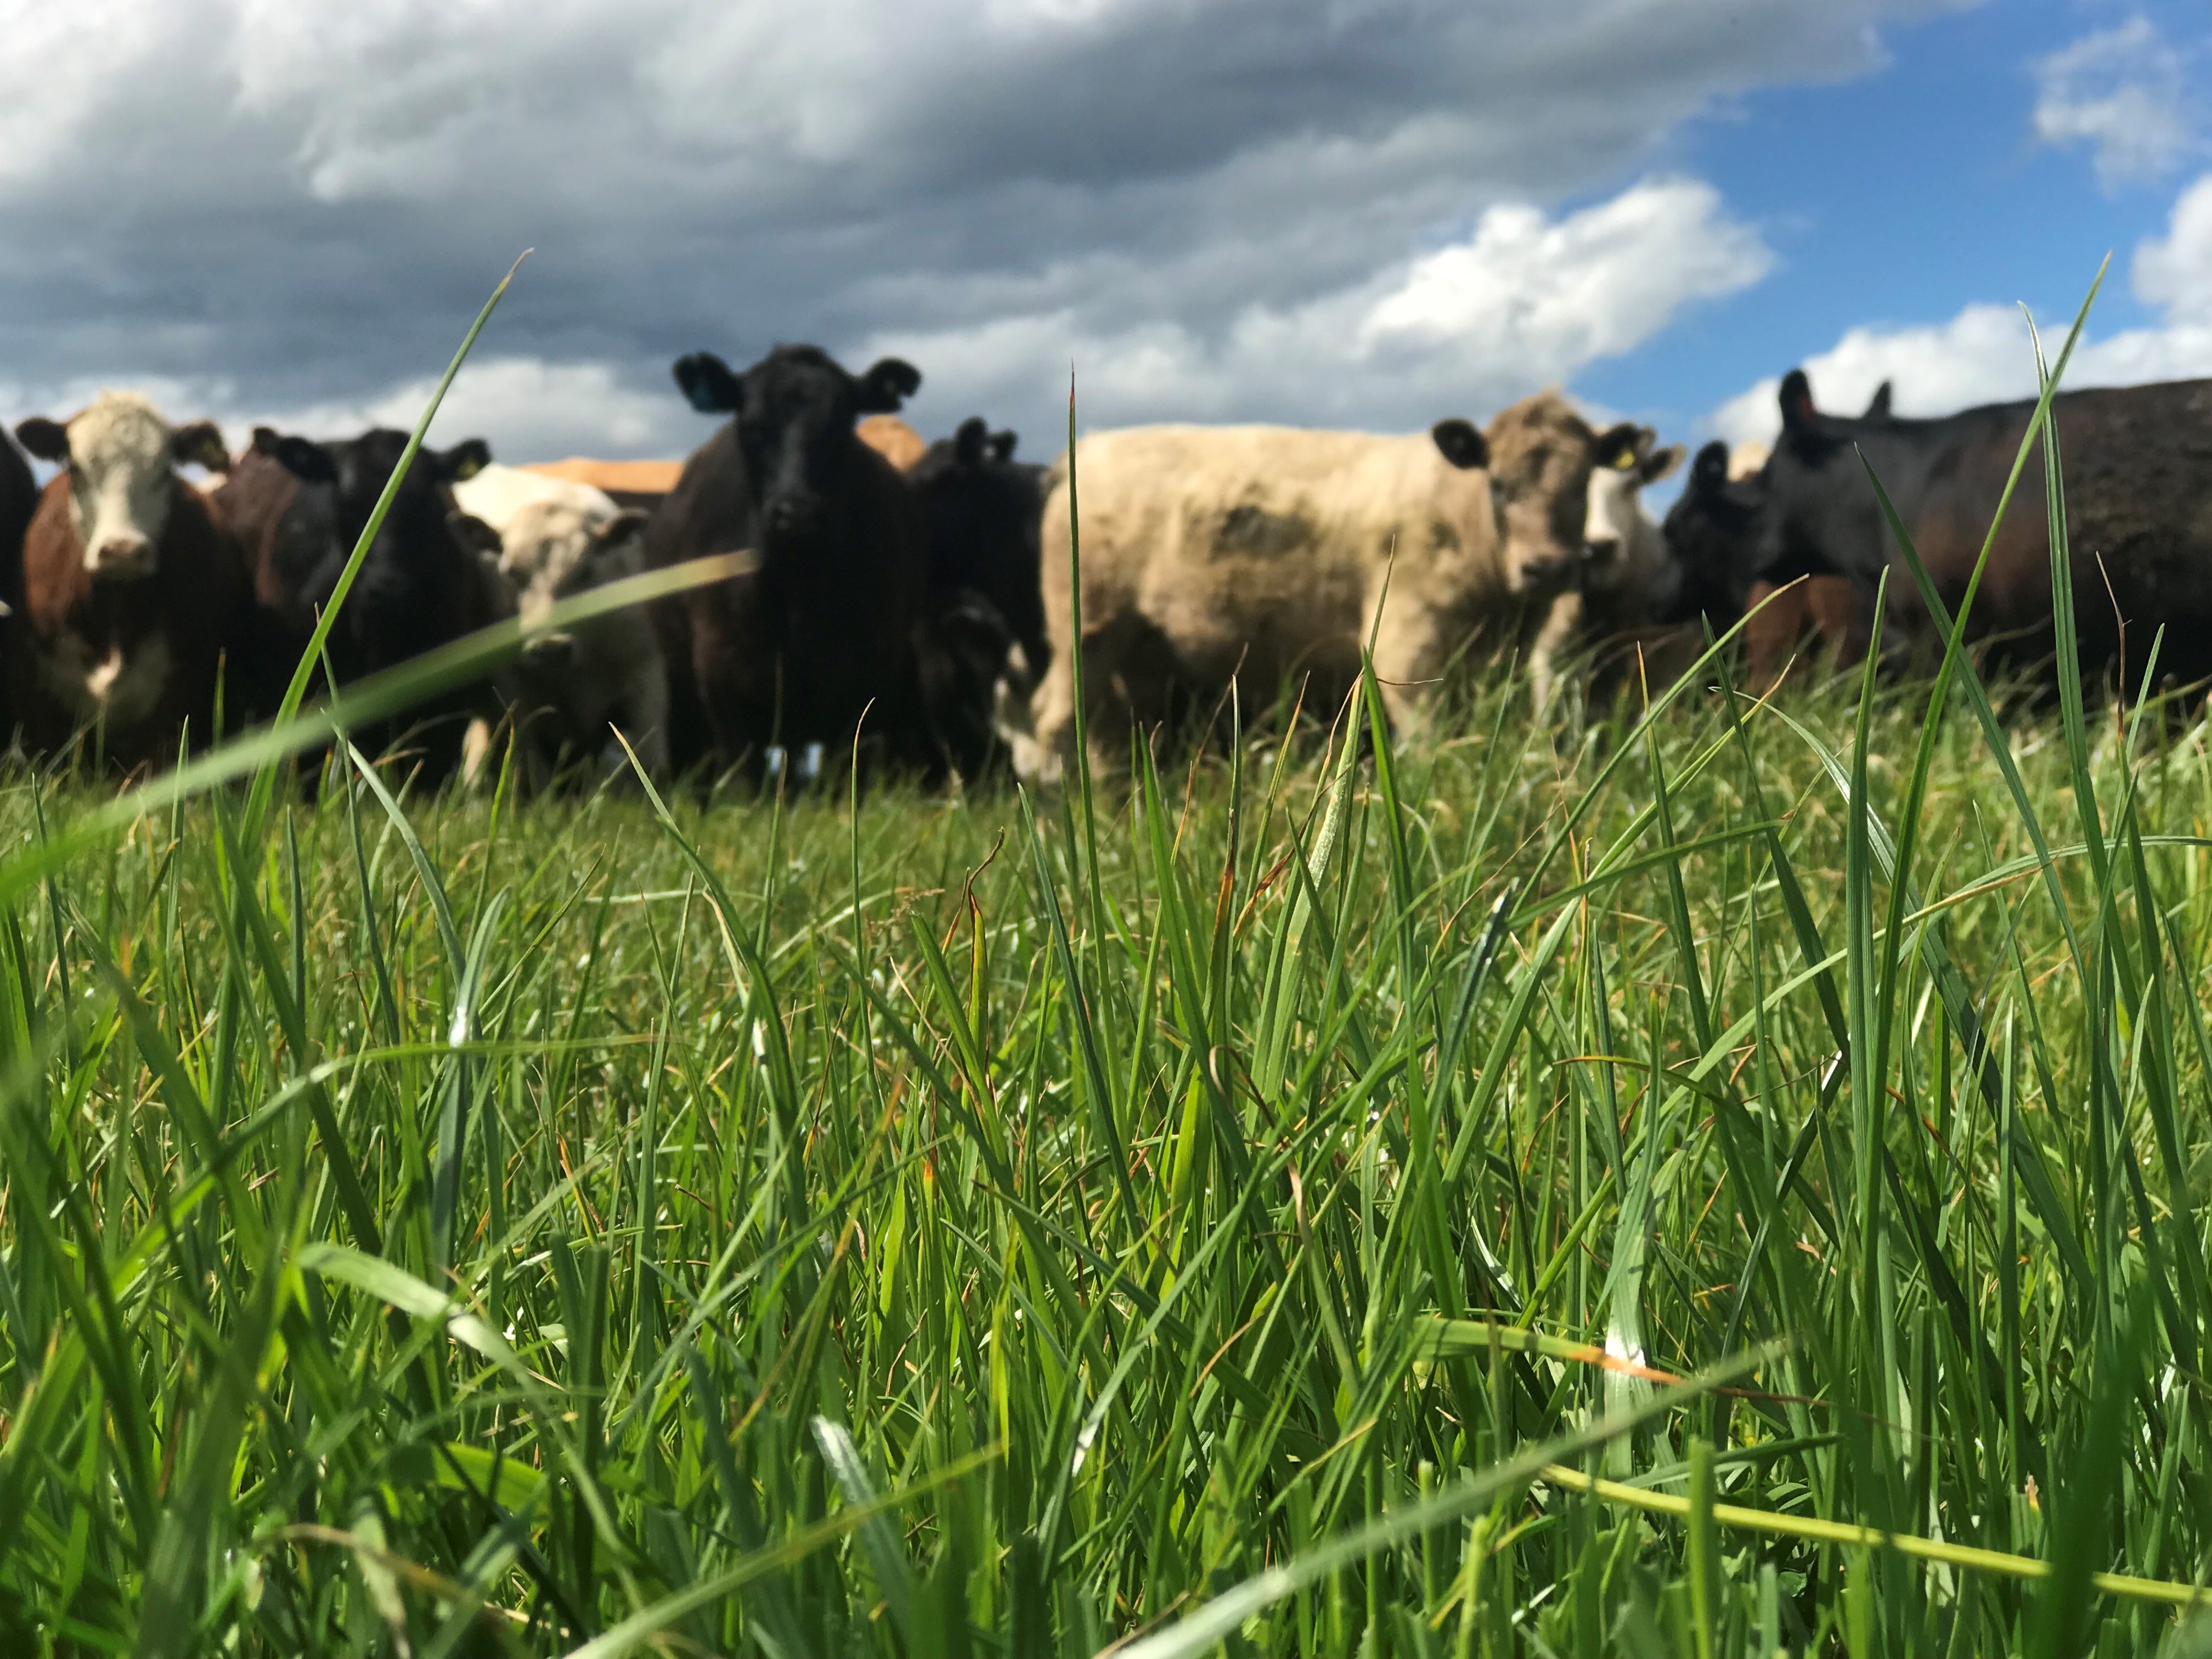 Post__7_-_Cattle_with_ryegrass_in_foreground.jpg